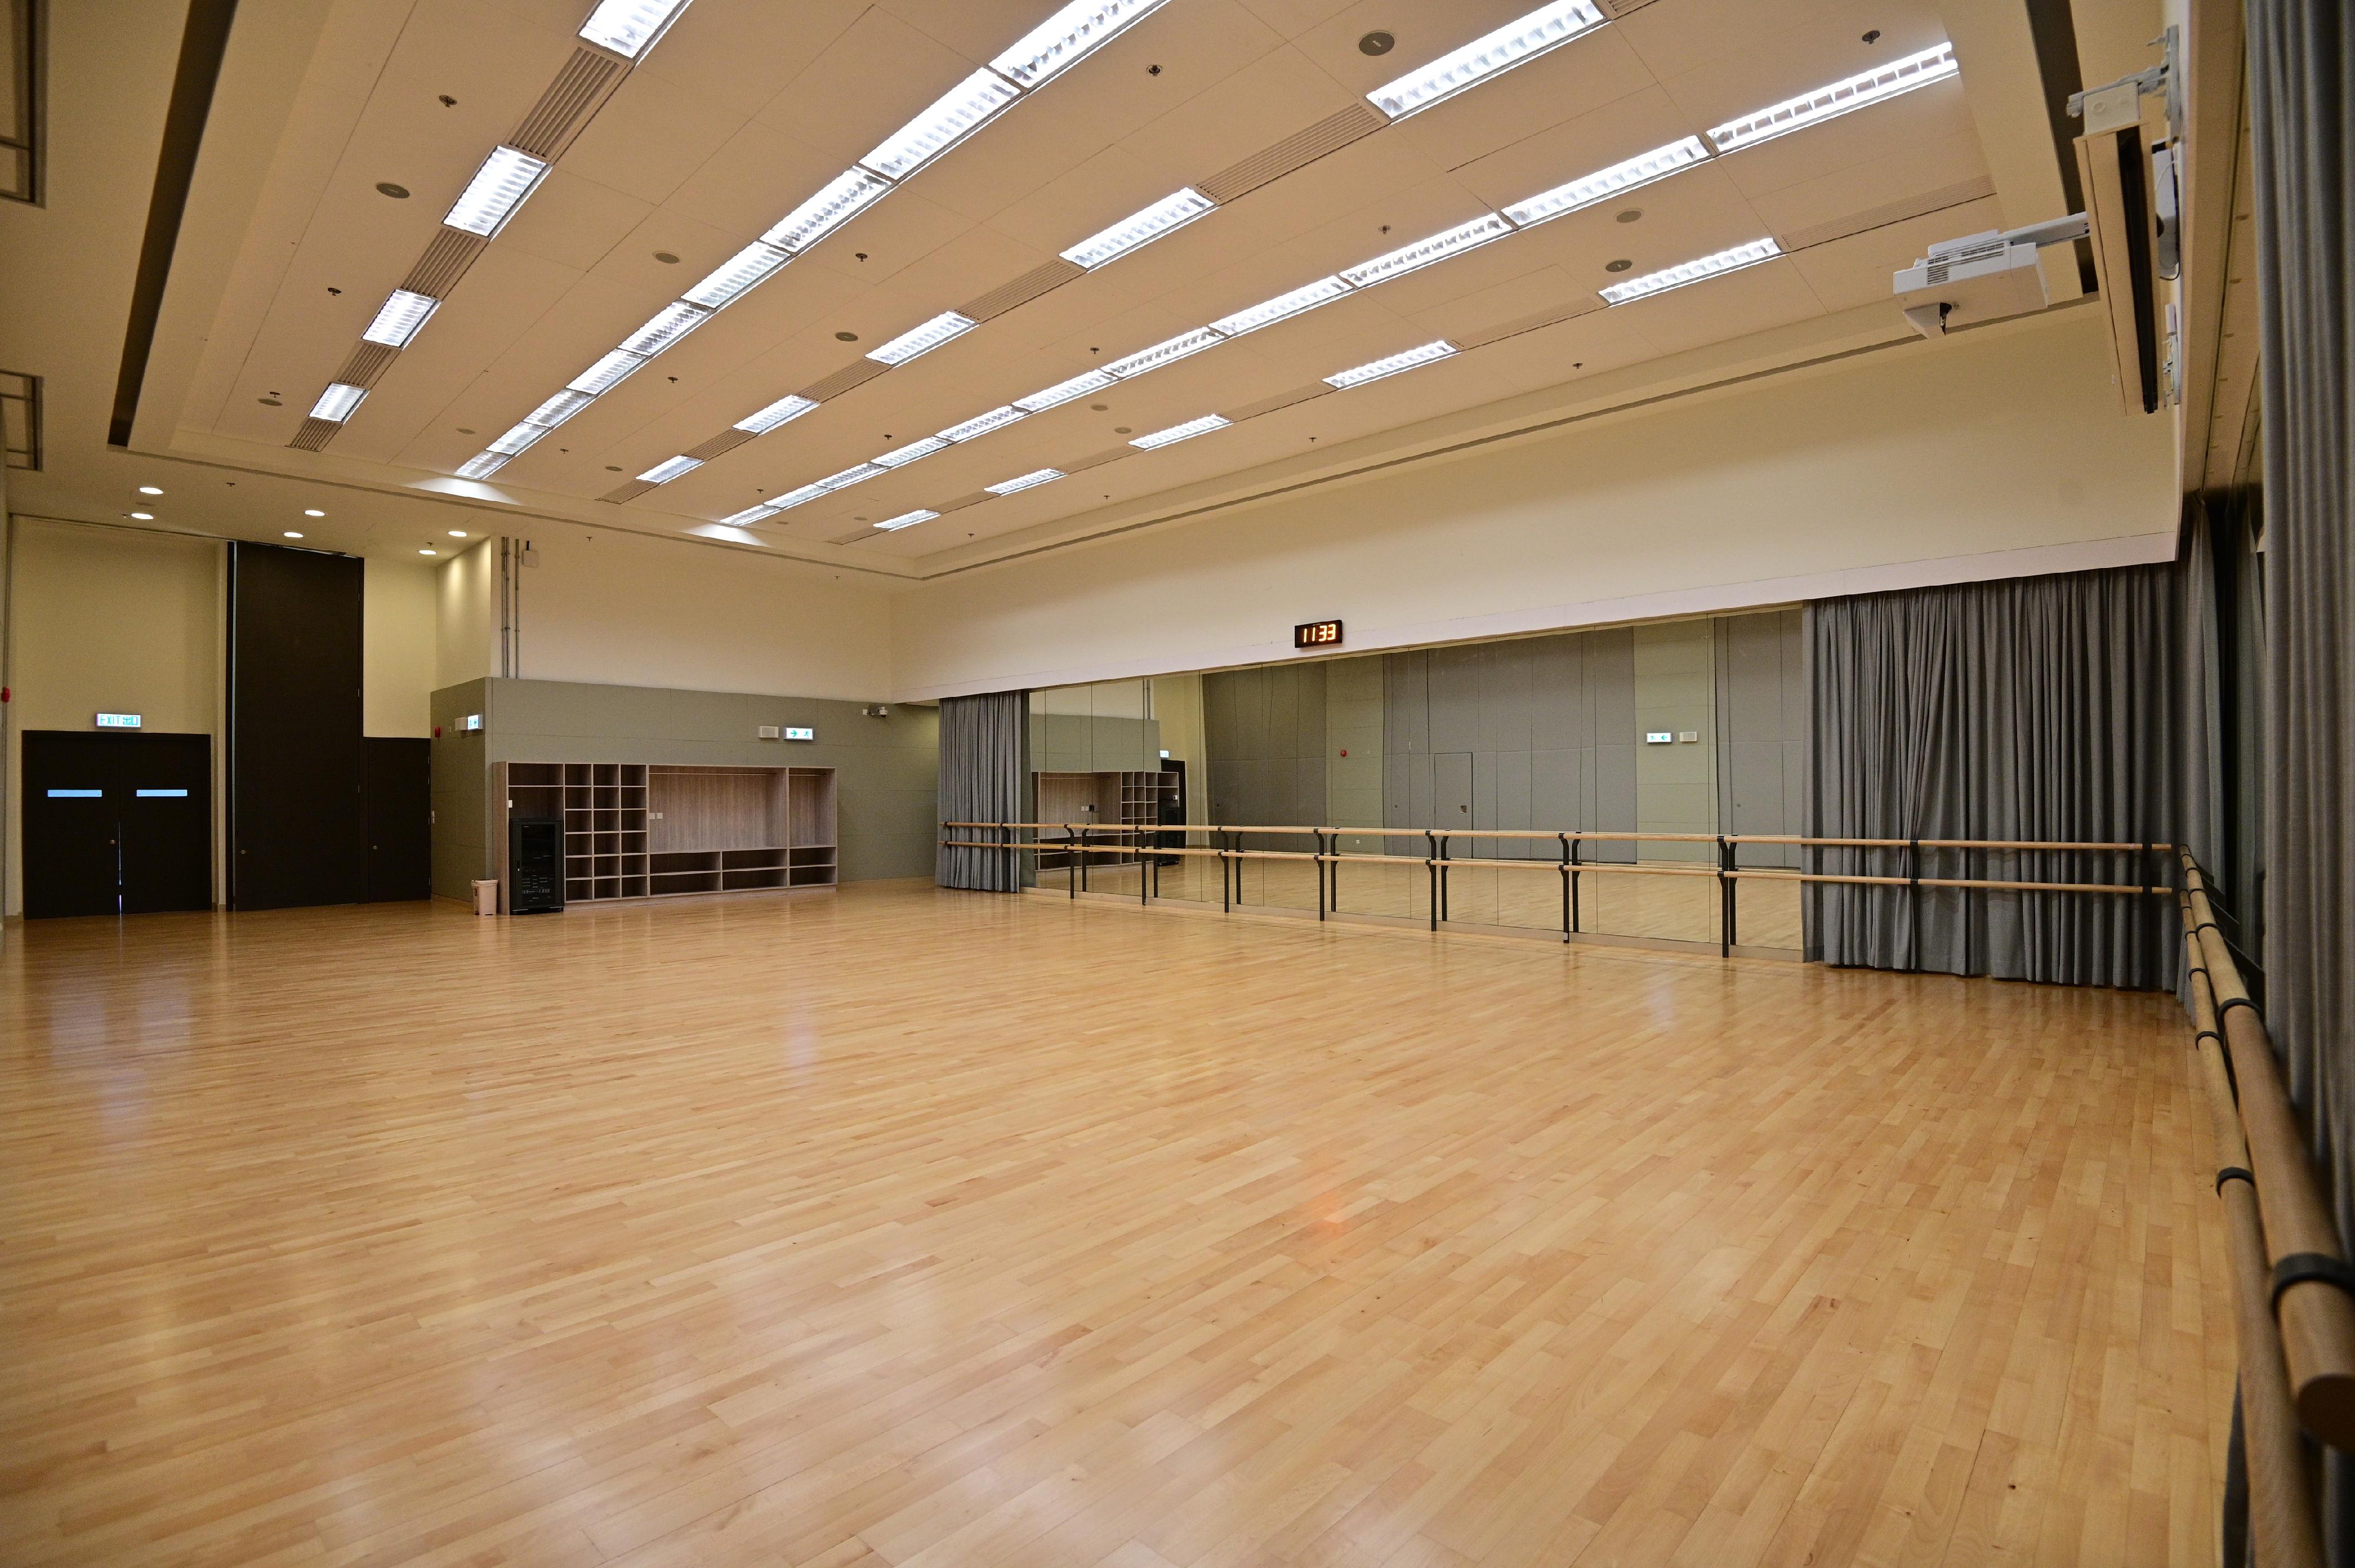 Sham Shui Po Sports Centre, managed by the Leisure and Cultural Services Department, will open for public use on September 28 (Wednesday), providing a wide range of leisure and sports facilities. Photo shows the multi-purpose activity room.